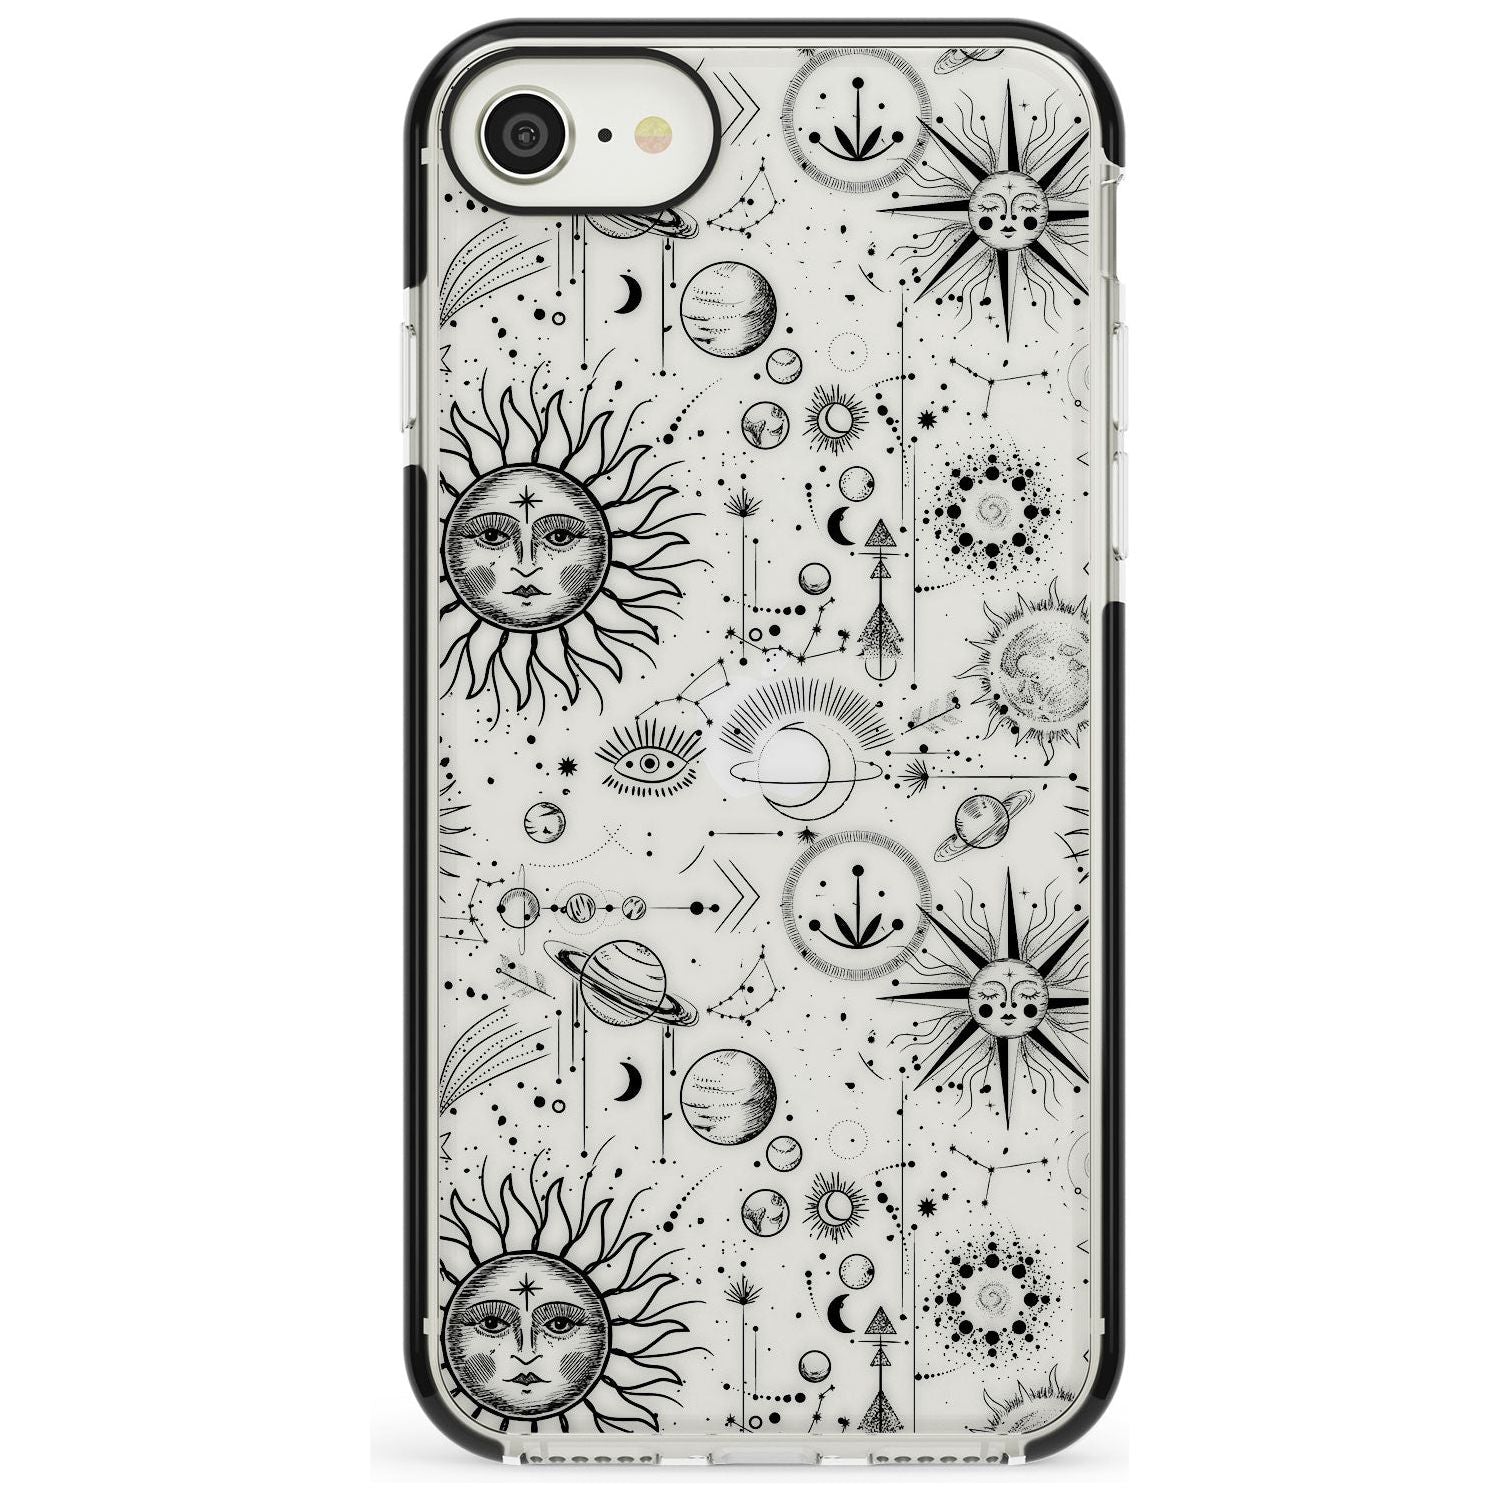 Suns & Planets Astrological Black Impact Phone Case for iPhone SE 8 7 Plus